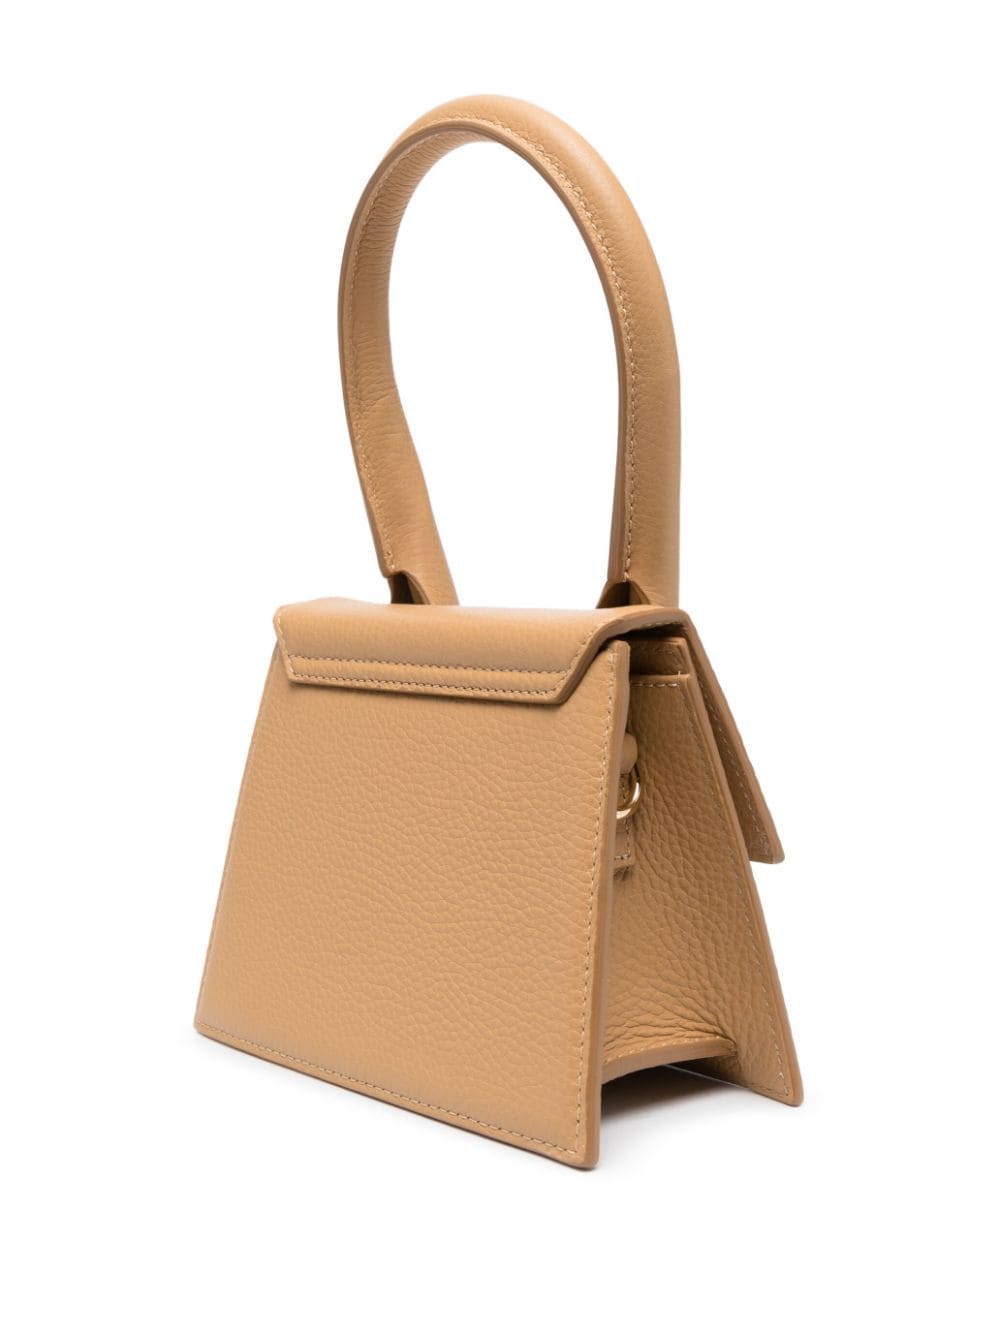 JACQUEMUS Beige Pebbled Leather Tote Handbag with Gold-Tone Logo for Women